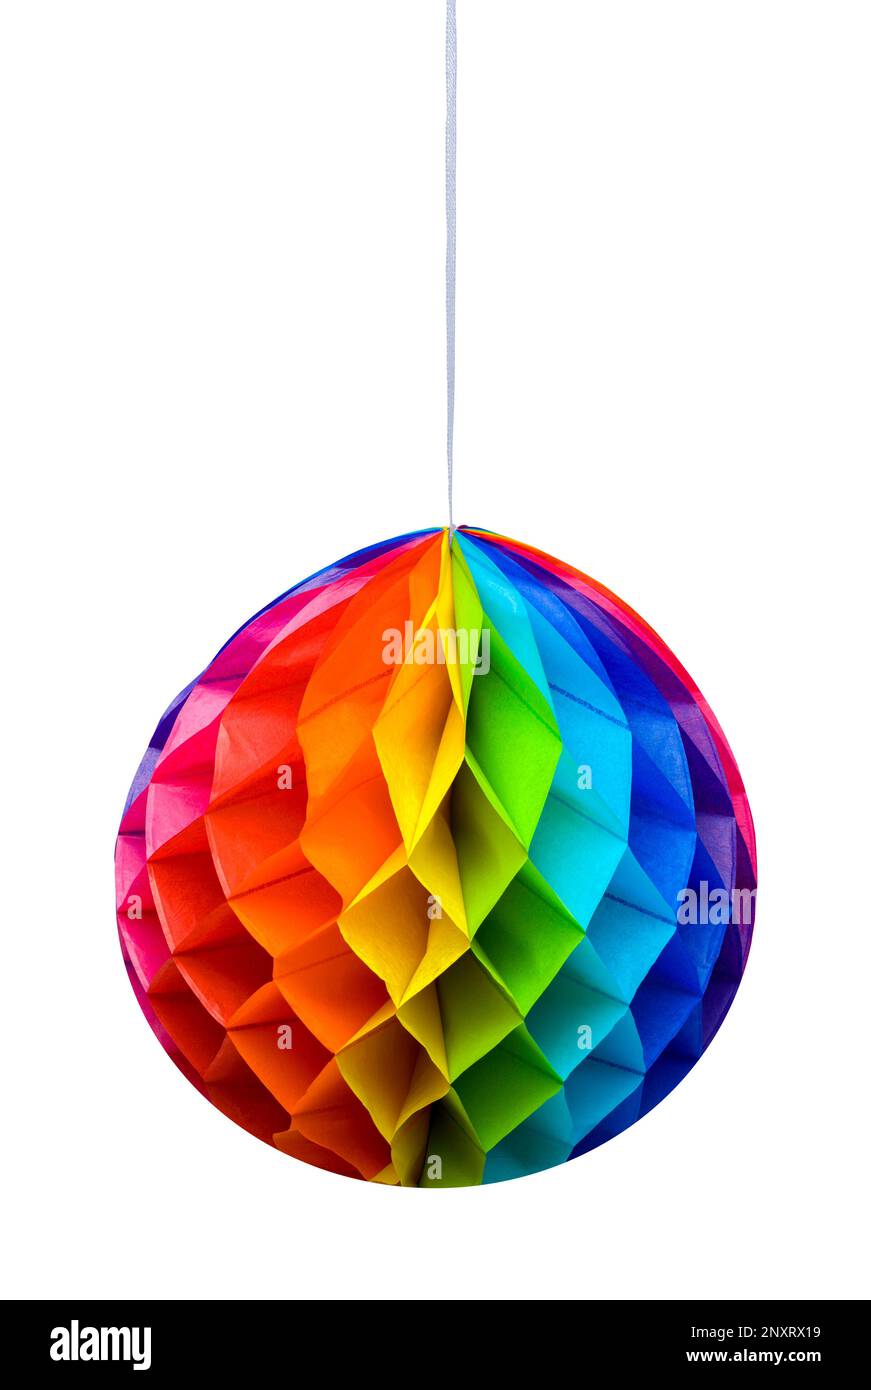 Colorful Rainbow Party Decoration Cut Out on White. Stock Photo